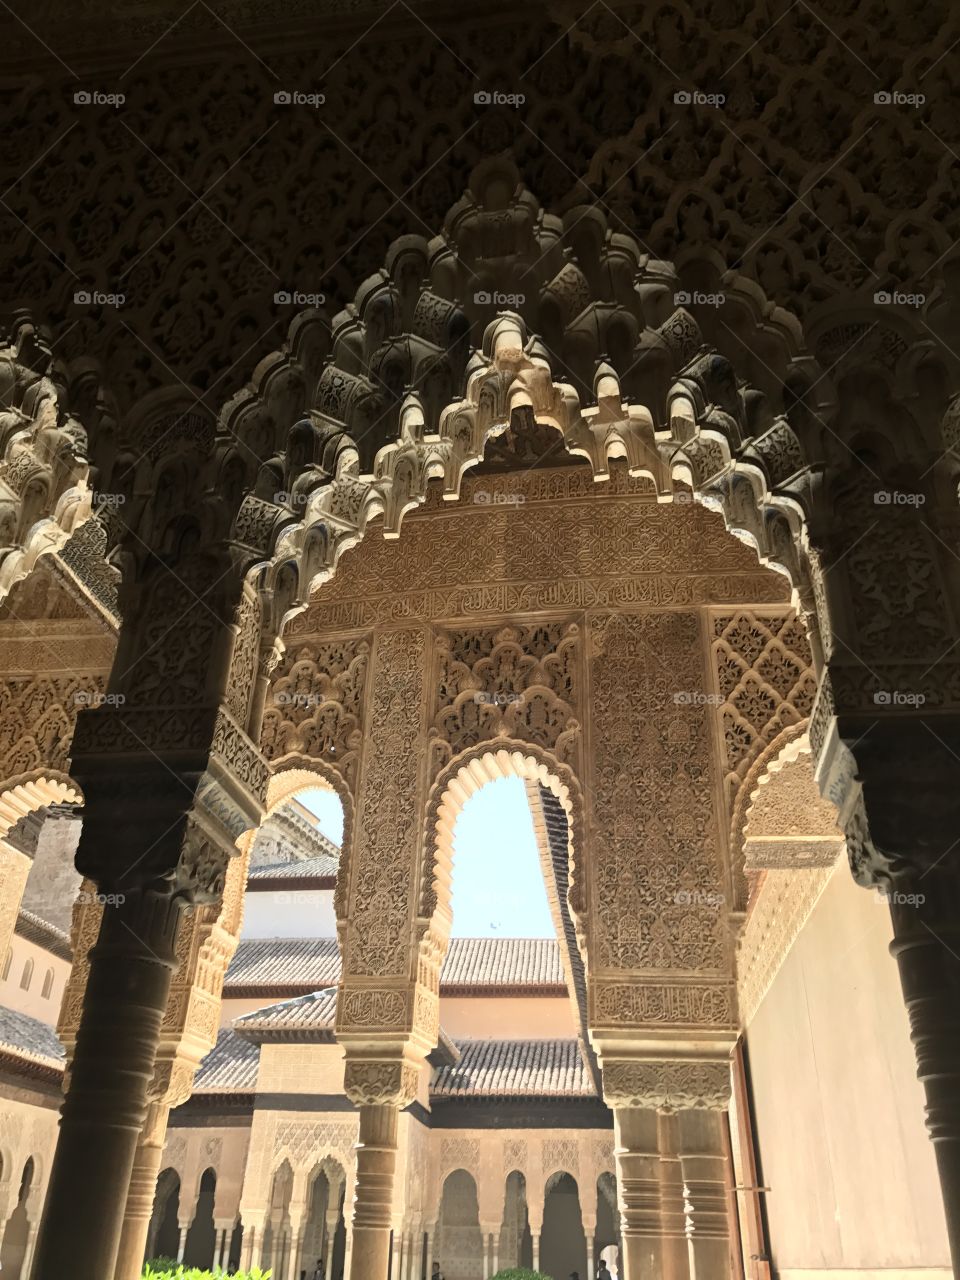 The Beauty of Alhambra 